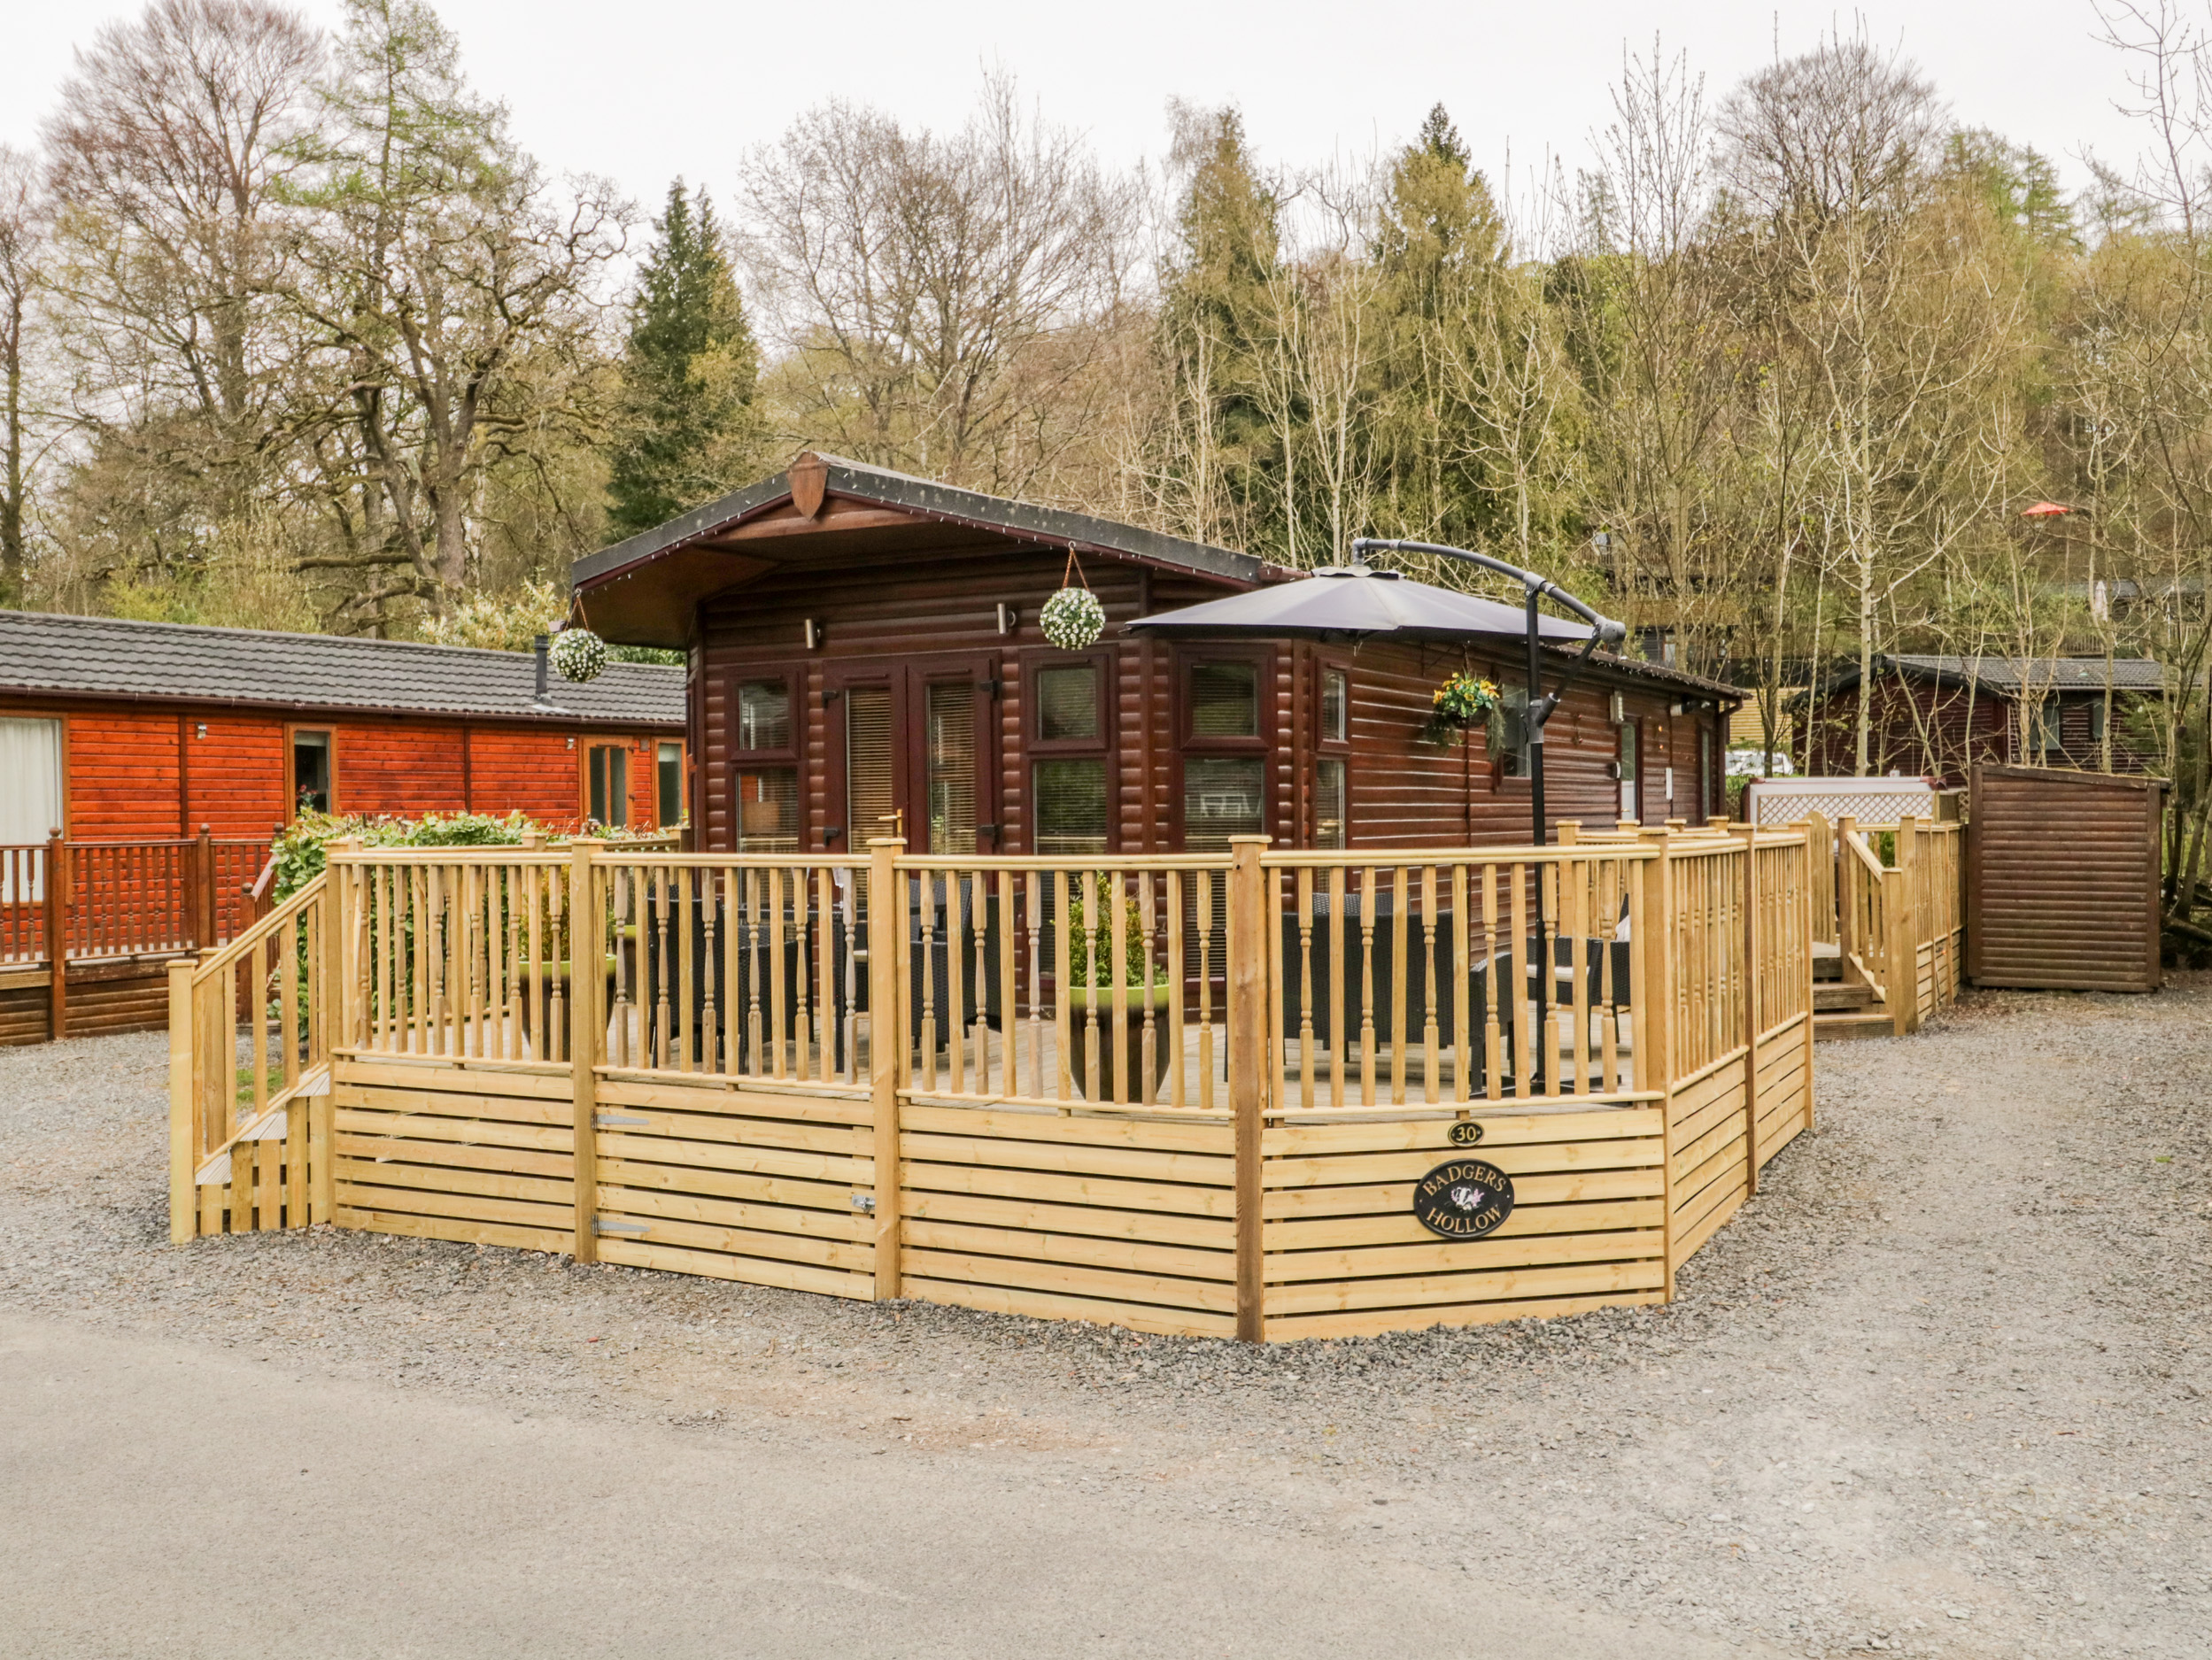 Badgers Hollow Lodge, Windermere